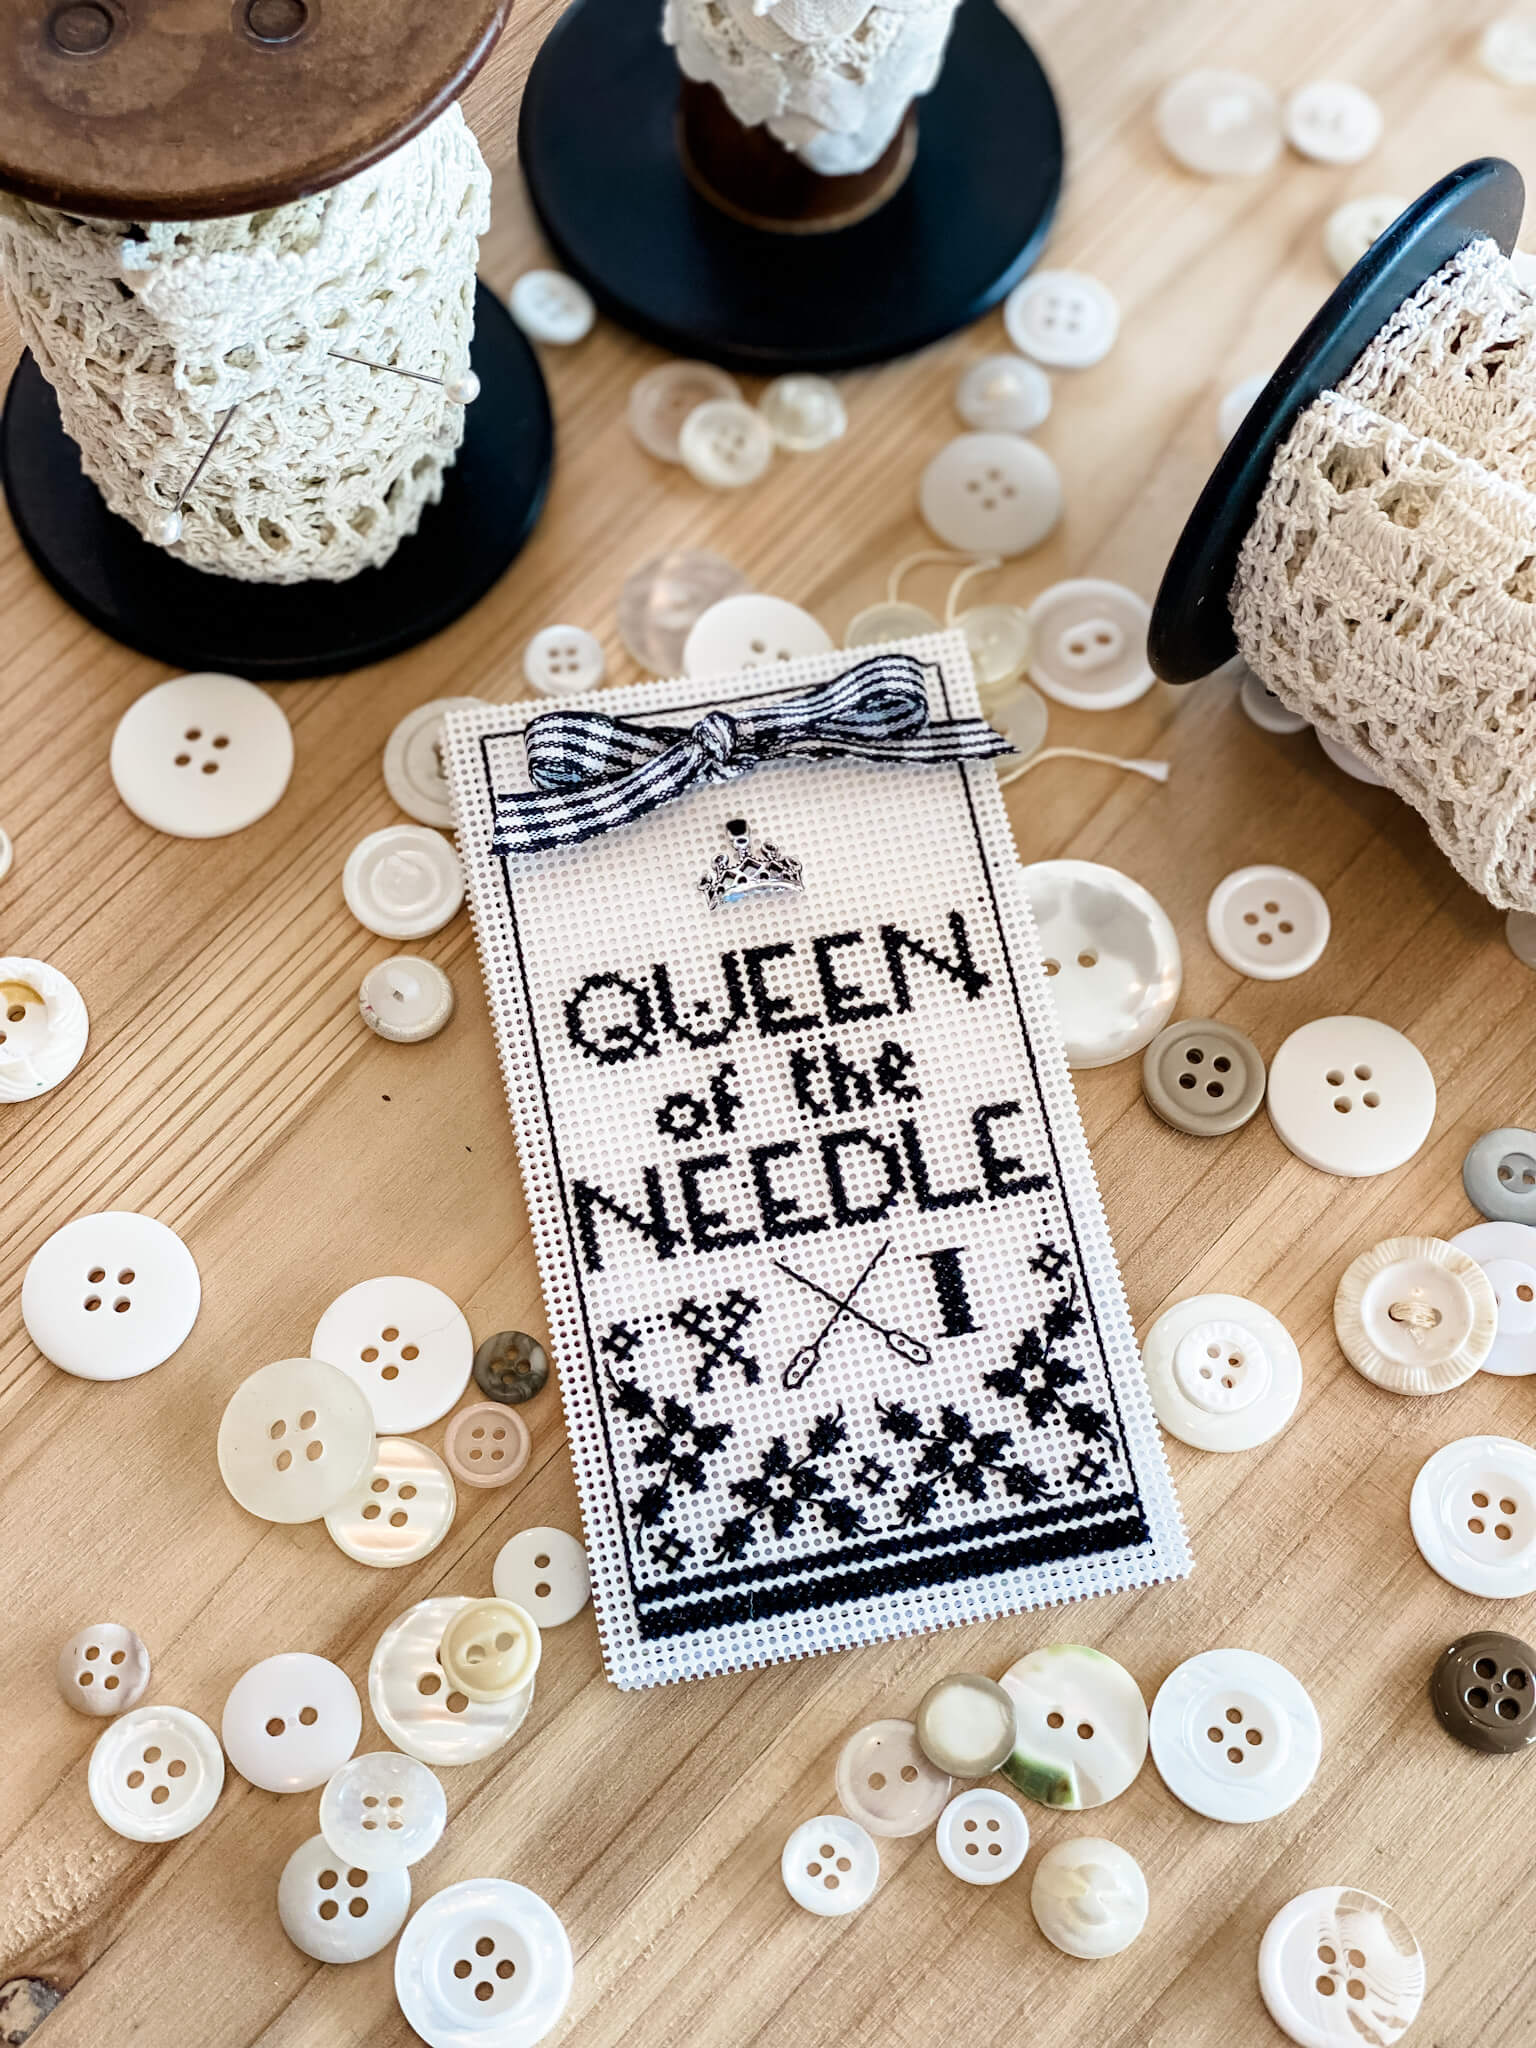 Needles for Cross Stitch - The Needle Lady